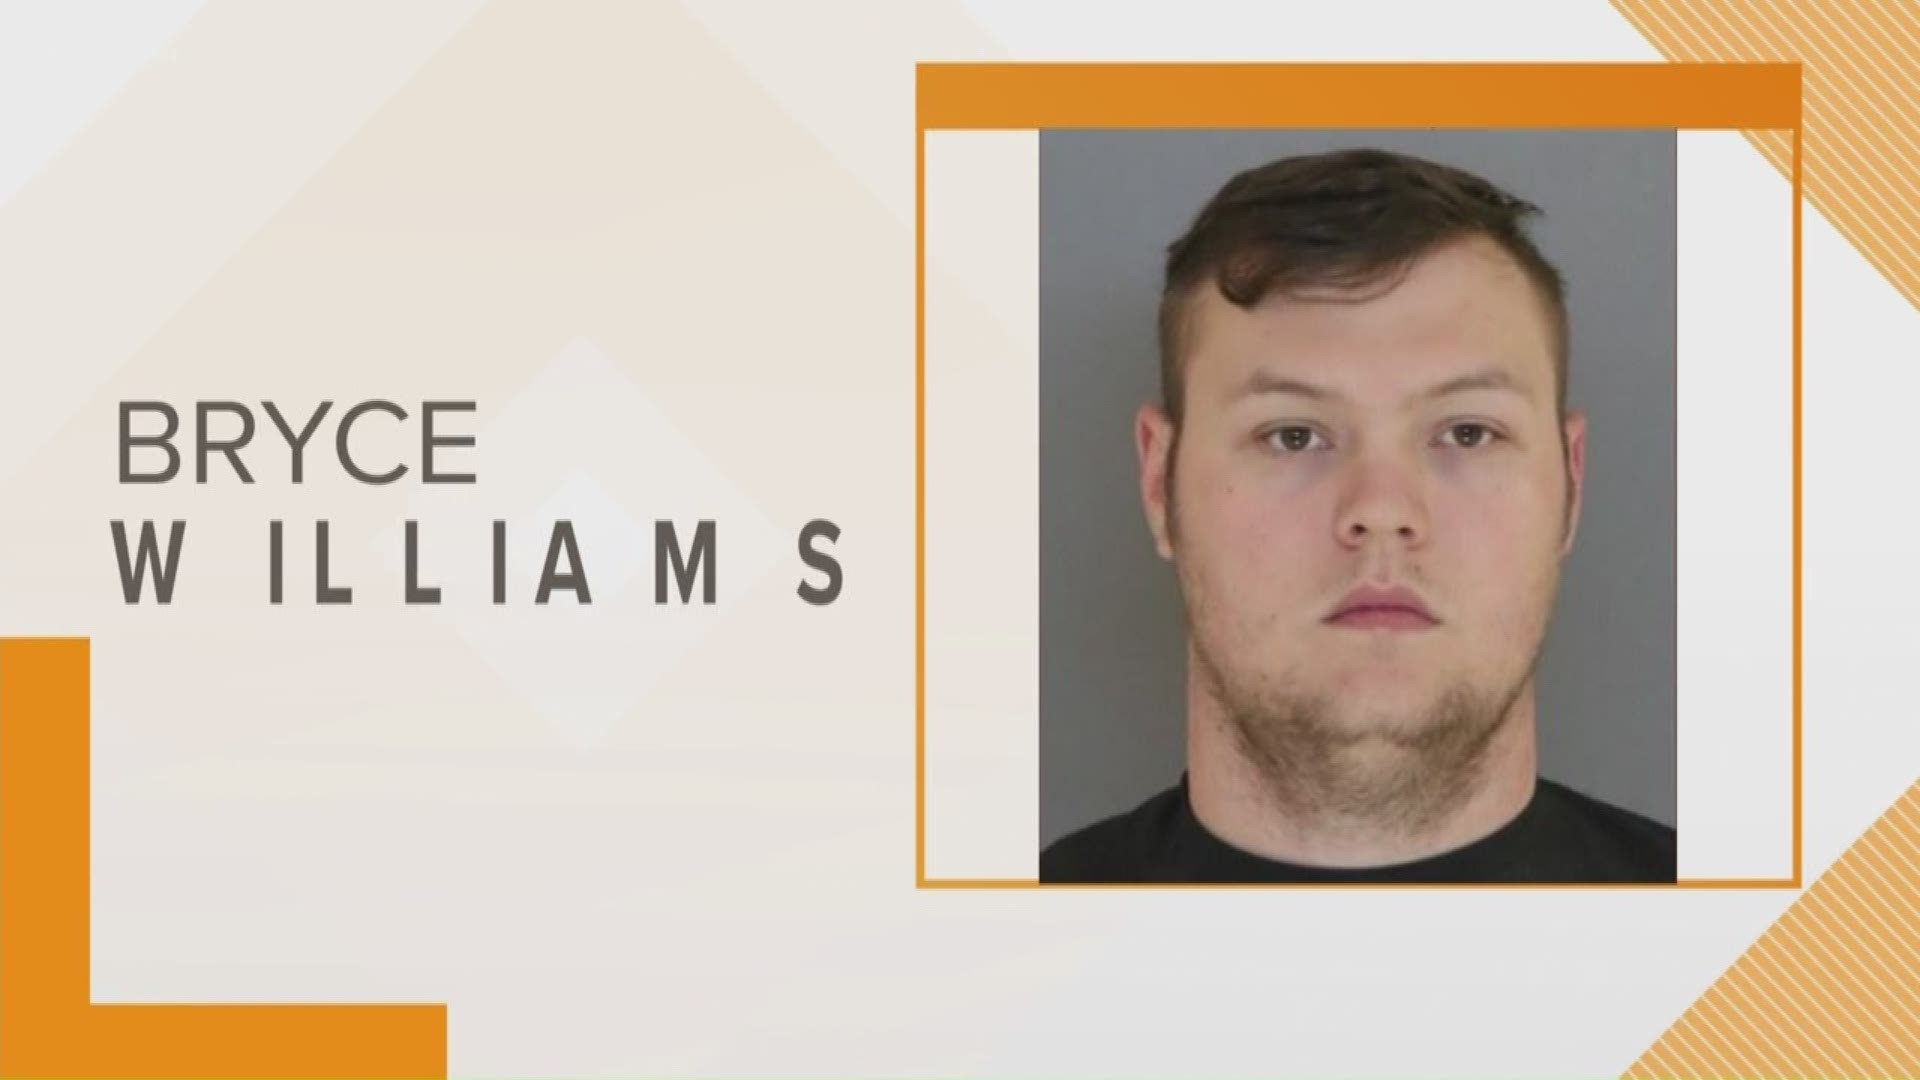 23-year-old Bryce D. Williams is charged with indecent exposure after exposing himself to a woman on Saturday.